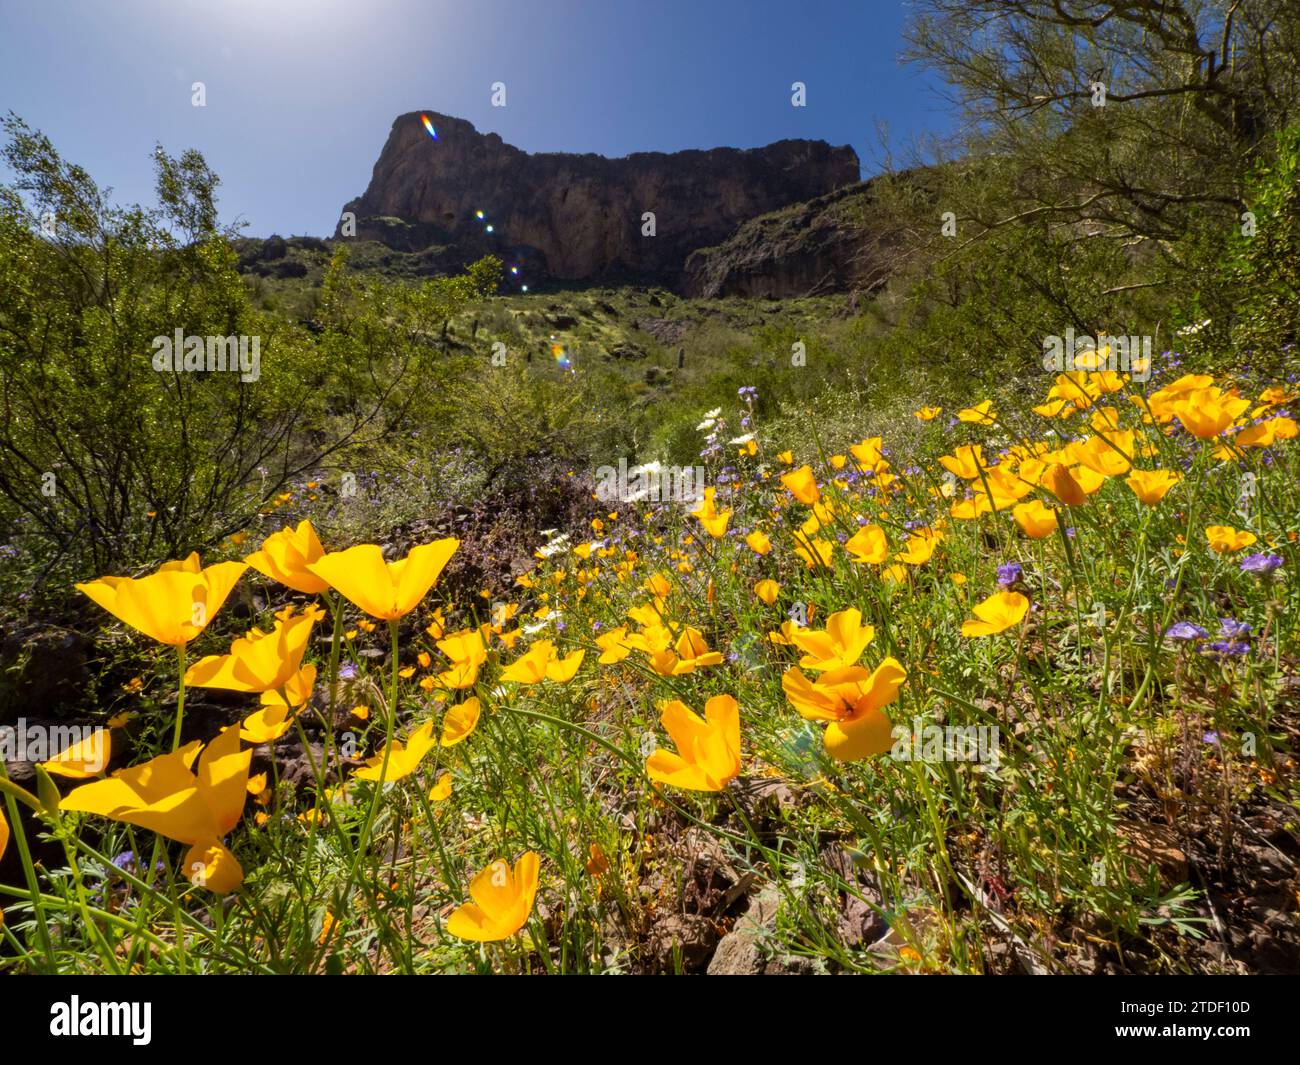 Wild flowers in bloom after a particularly good rainy season at Picacho Peak State Park, Arizona, United States of America, North America Stock Photo